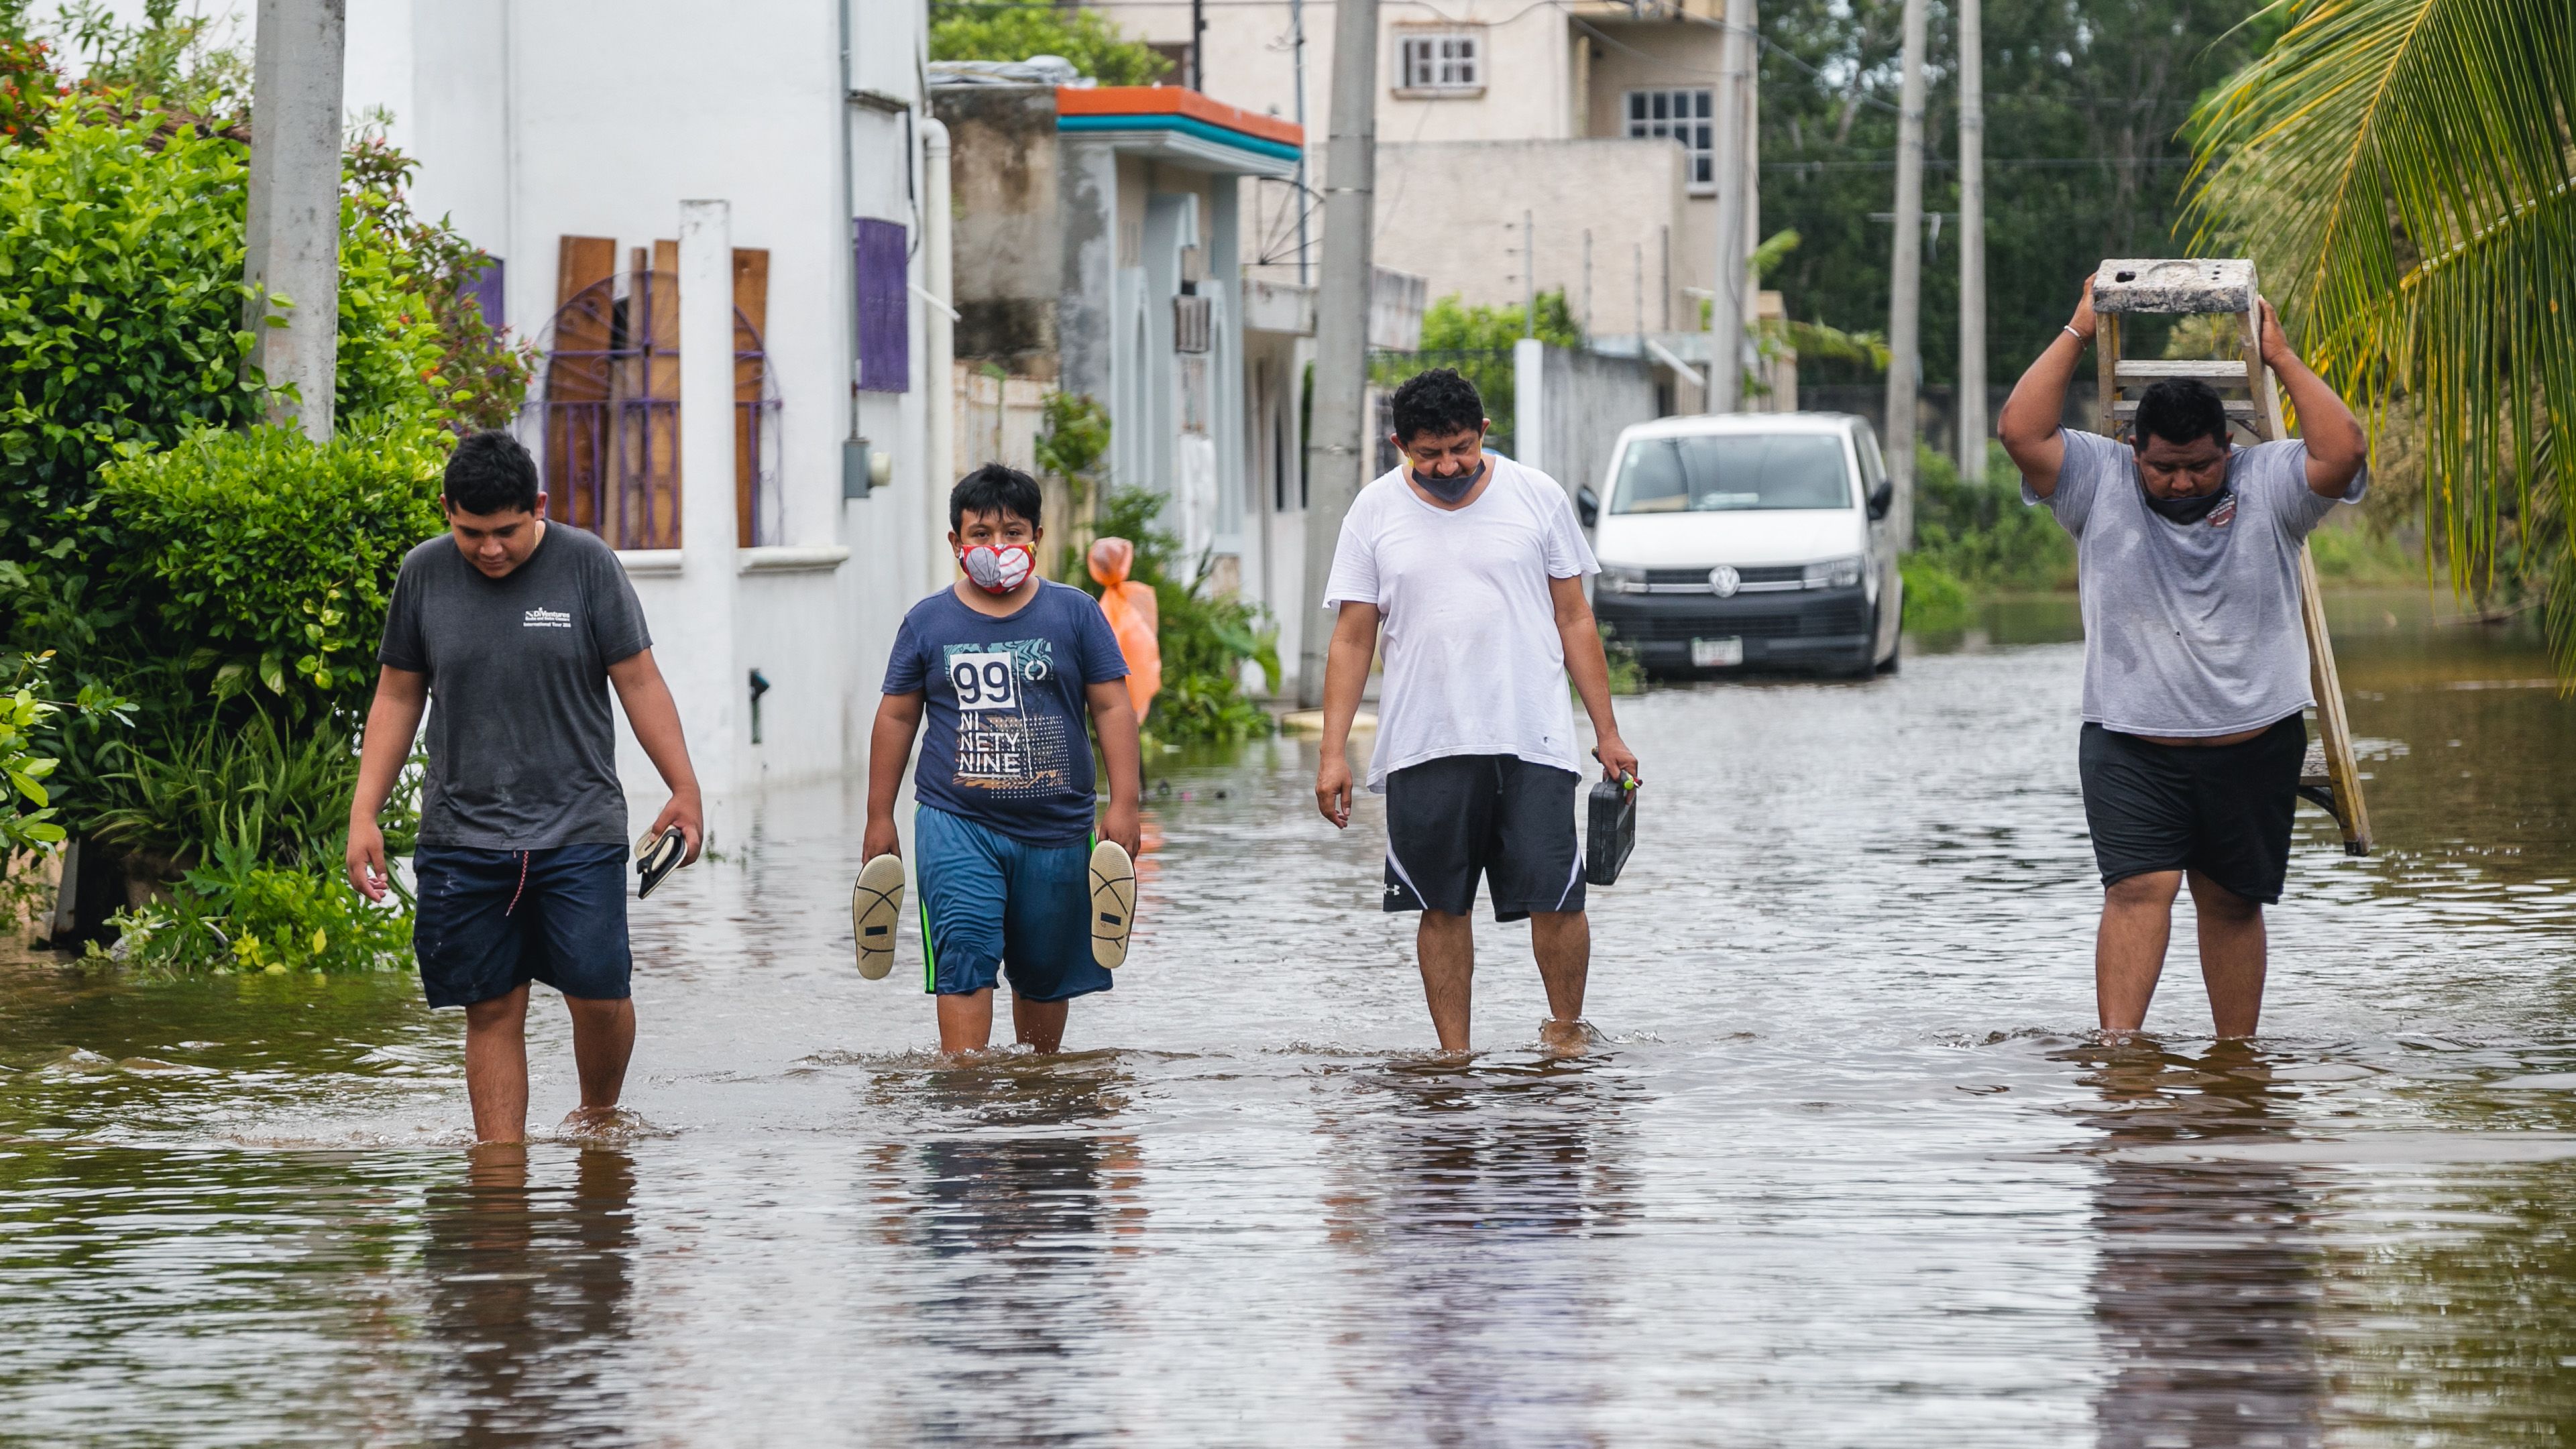 People walk on a flooded street after Hurricane Delta hit on Wednesday, October 7, in Cozumel, Mexico.